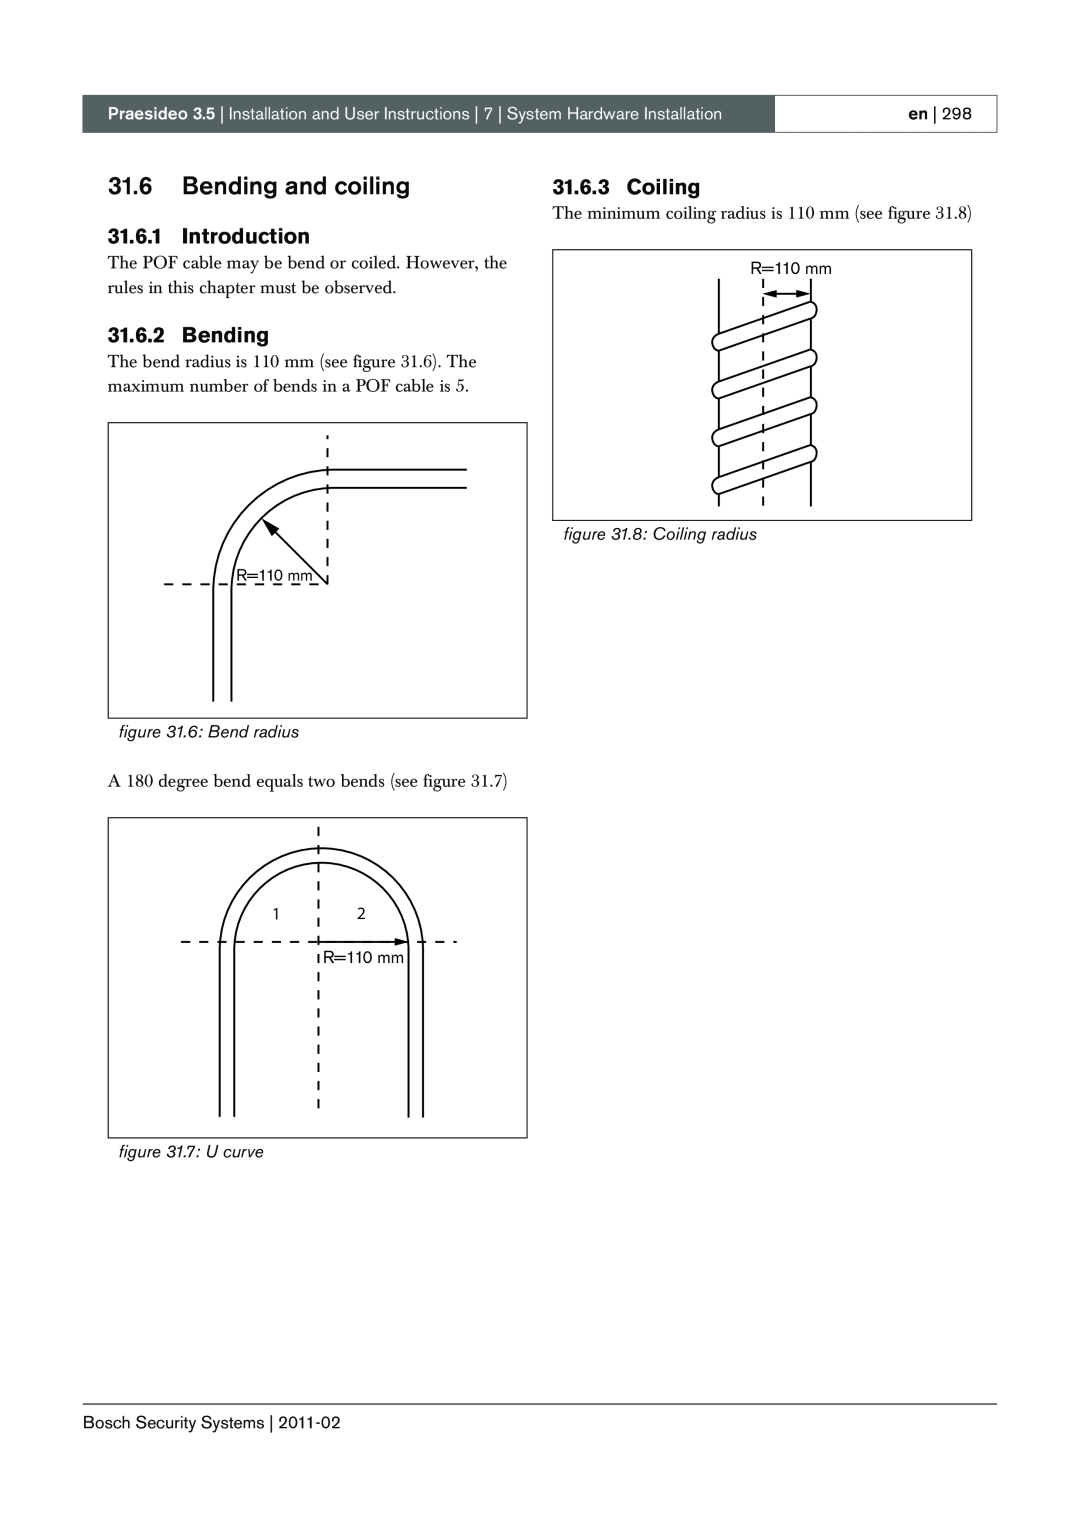 Bosch Appliances 3.5 manual 31.6Bending and coiling, Introduction, 6: Bend radius, 7: U curve, 8: Coiling radius 